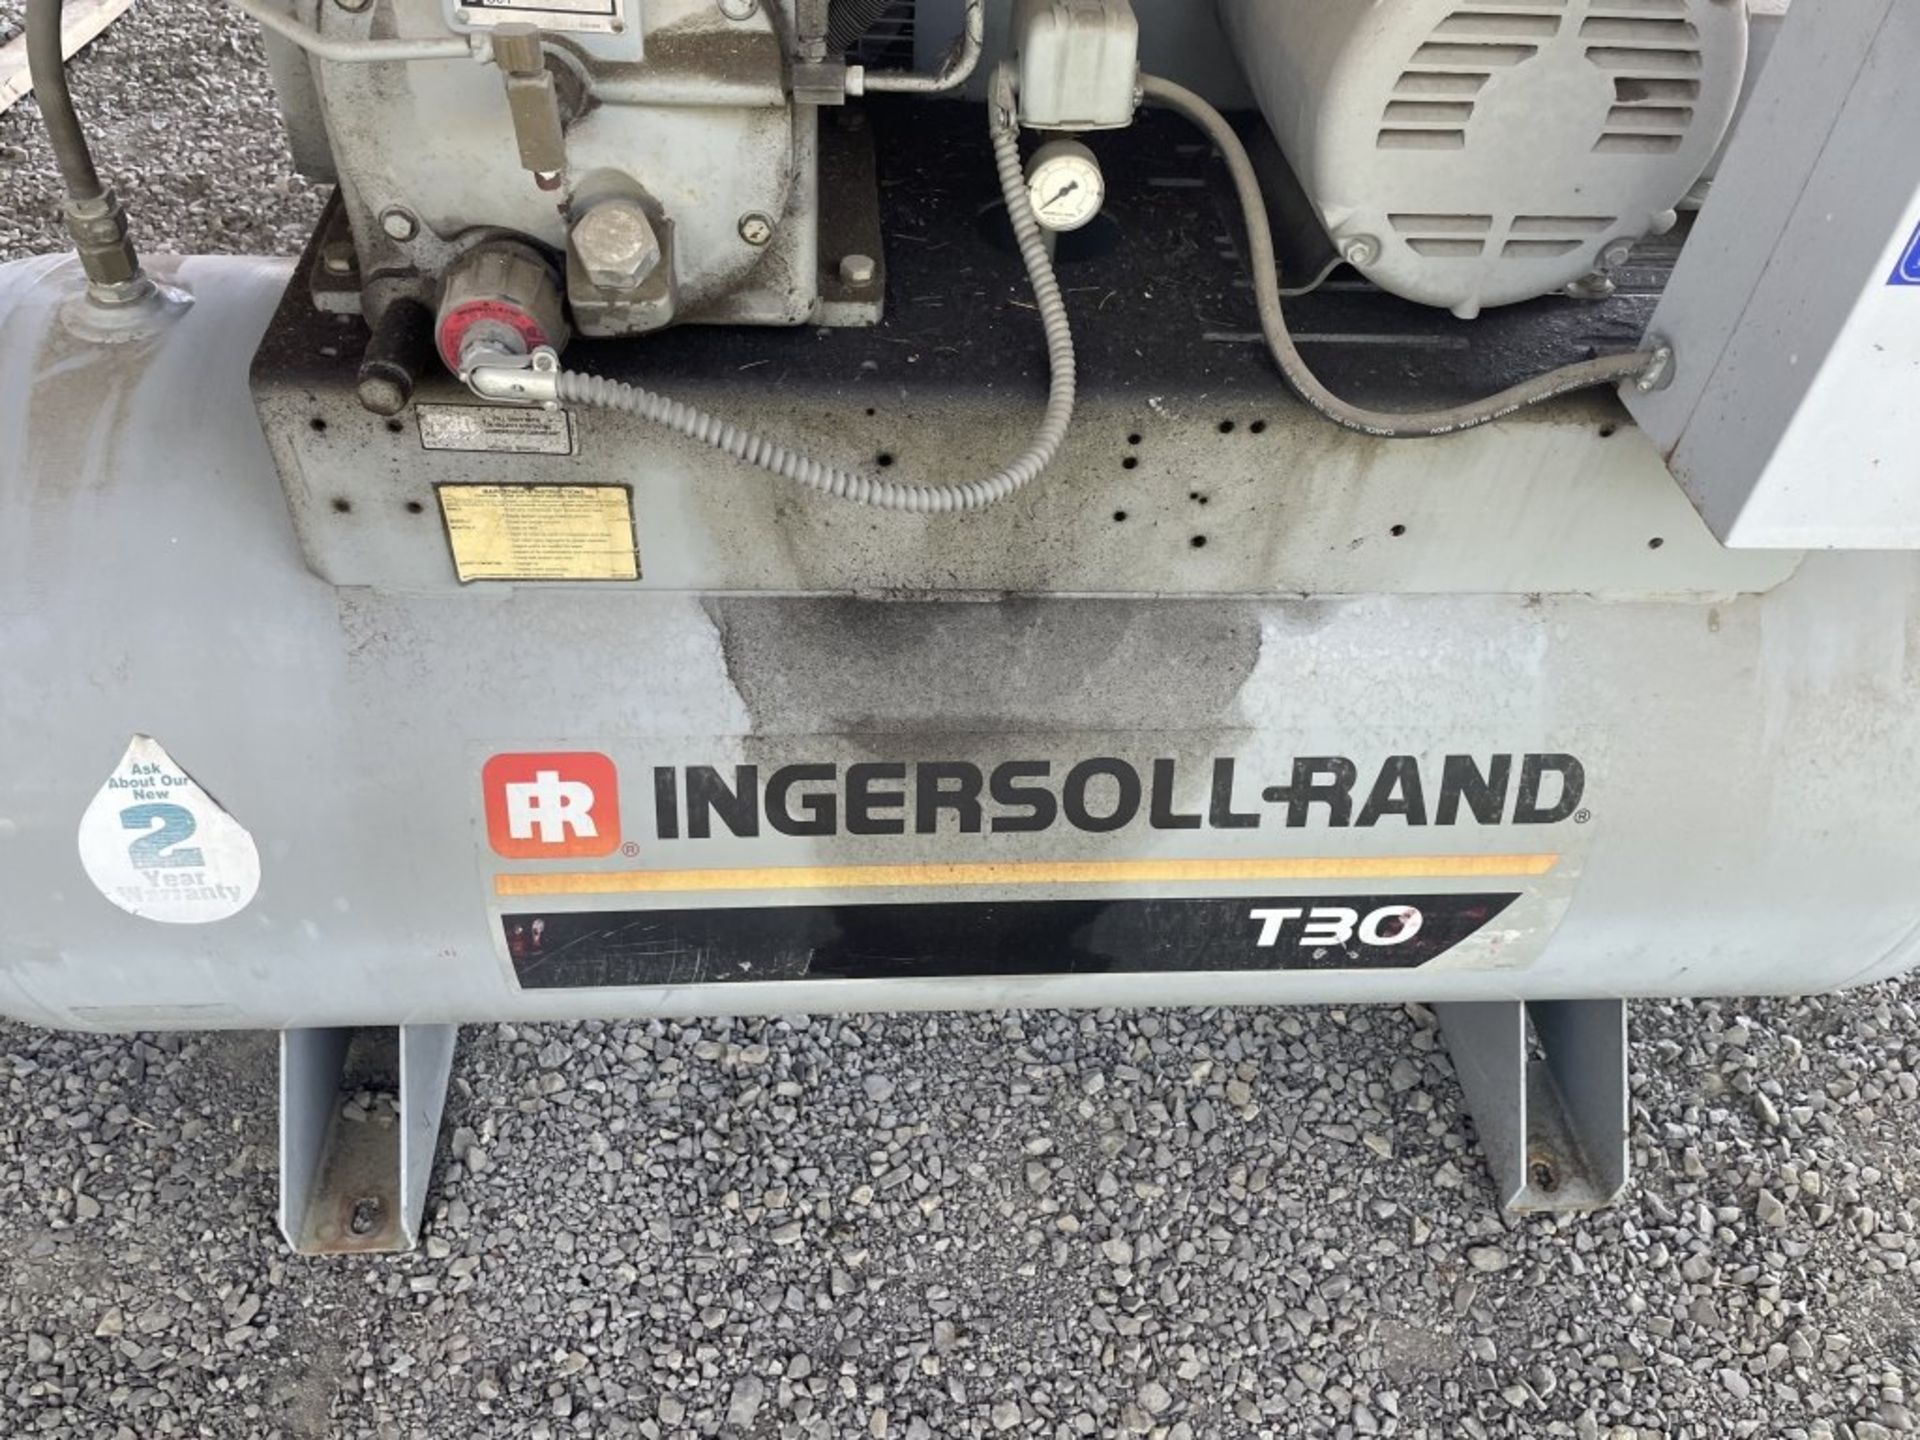 Ingersoll-Rand T30 Air Compressor - Image 7 of 8